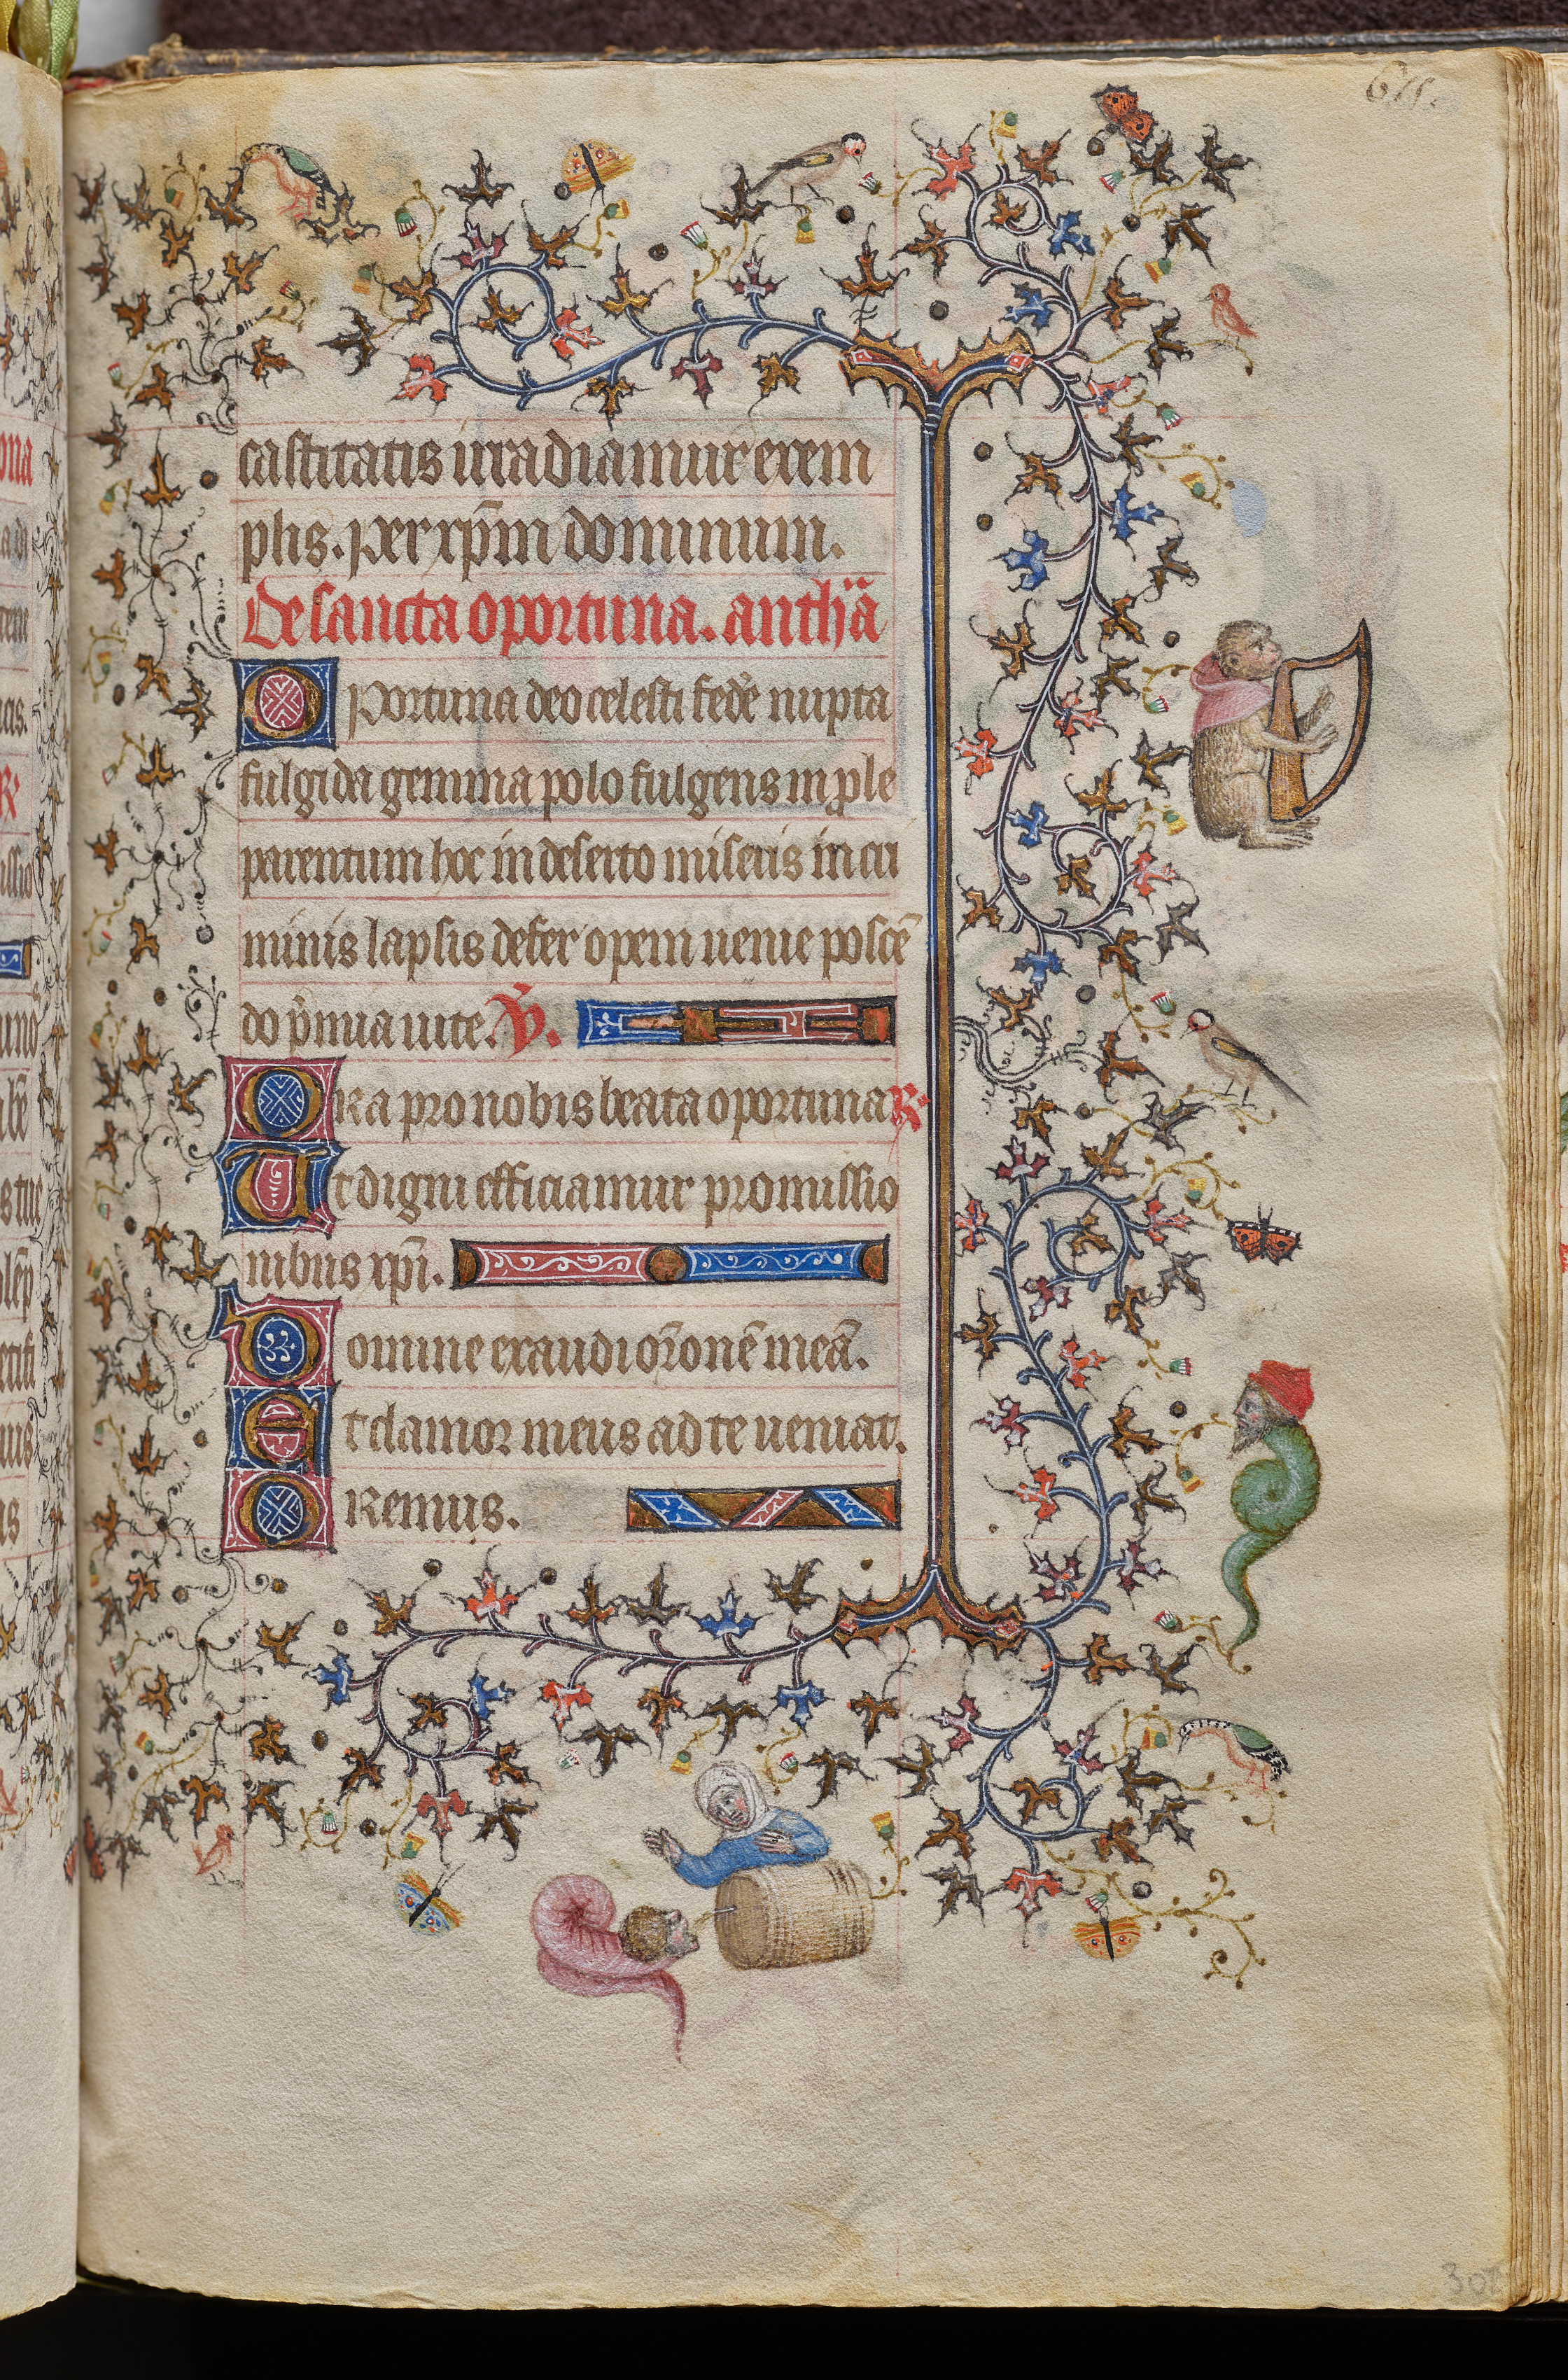 Hours of Charles the Noble, King of Navarre (1361-1425): fol. 302r, Text